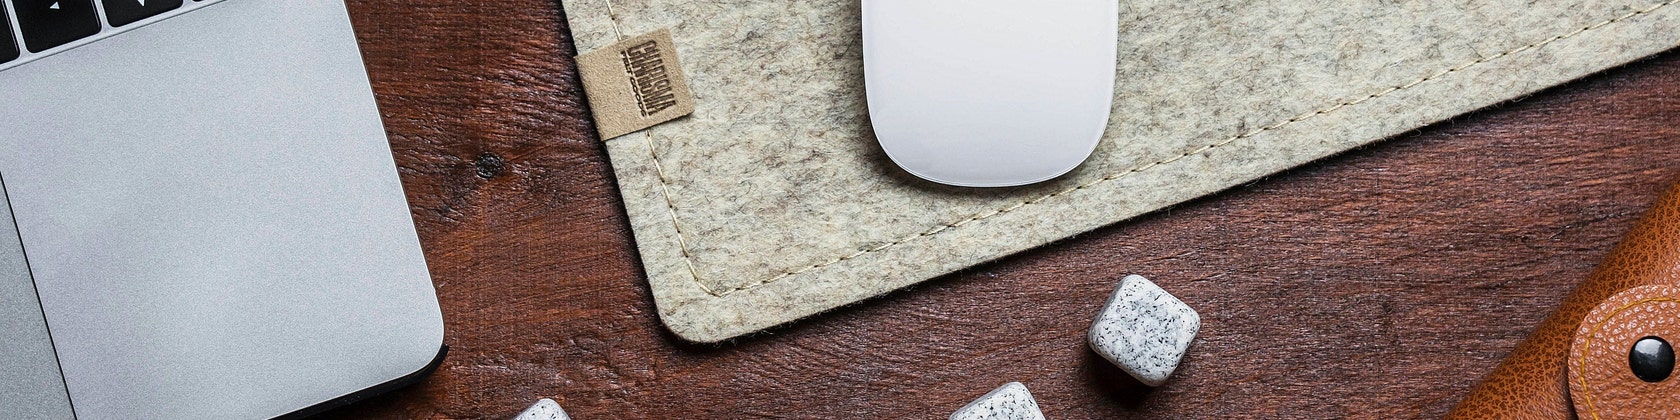 Keyboard pad felt with leather mouse pad - werktat